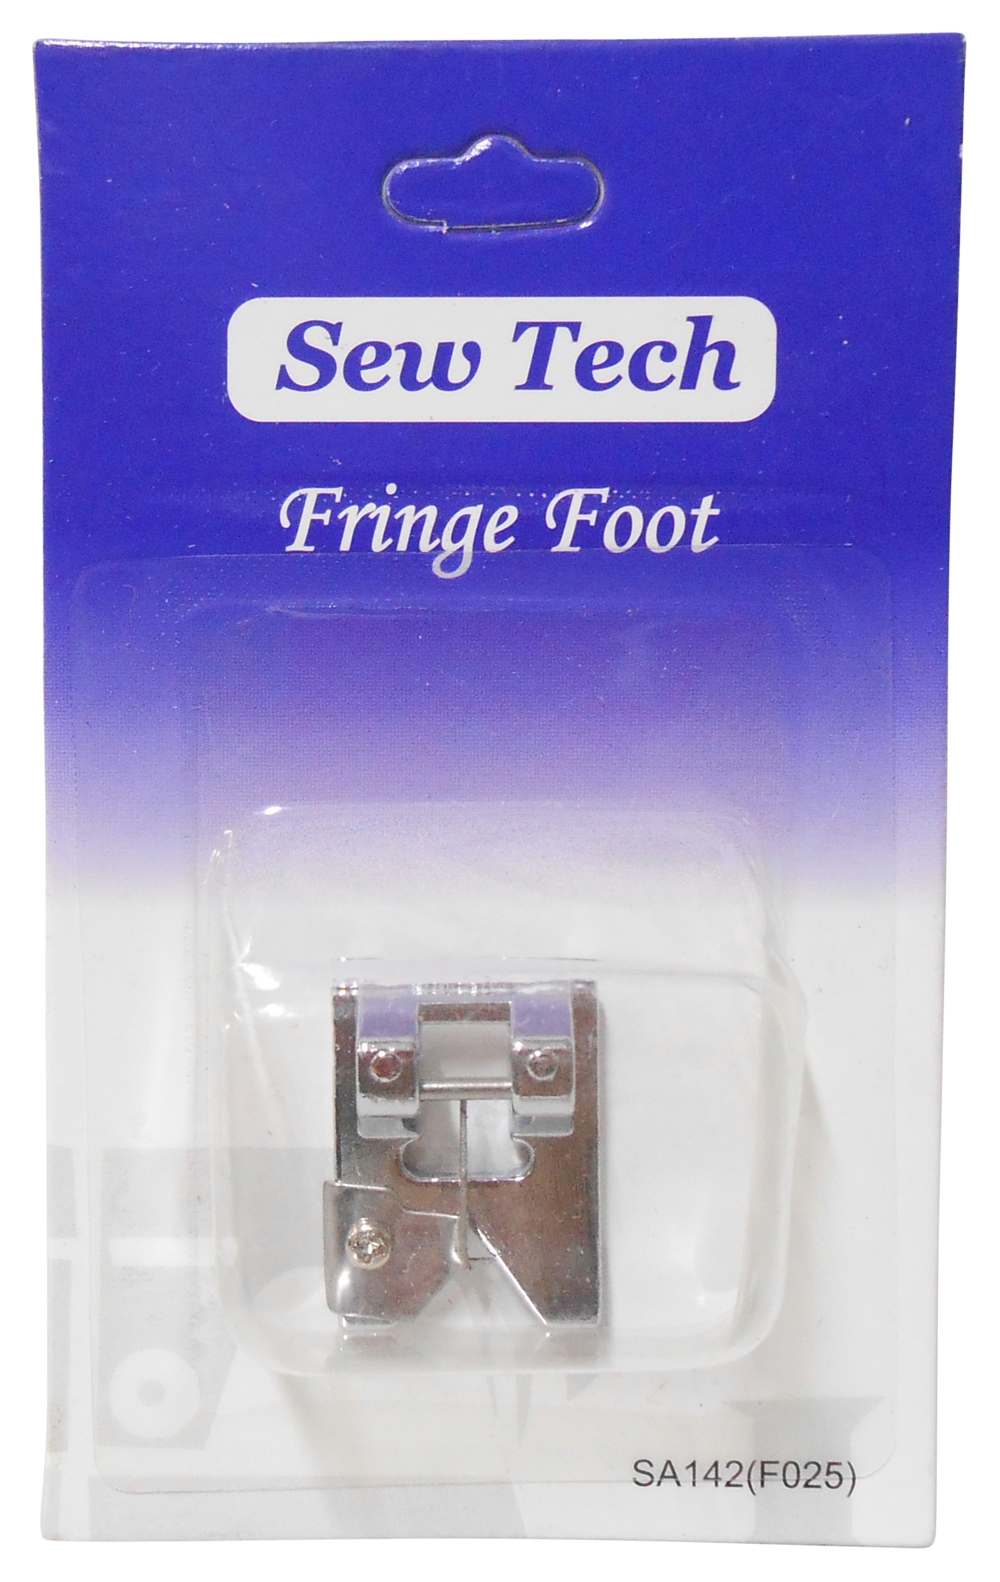 SA142 Fringe Foot by Sew Tech - CLOSEOUT